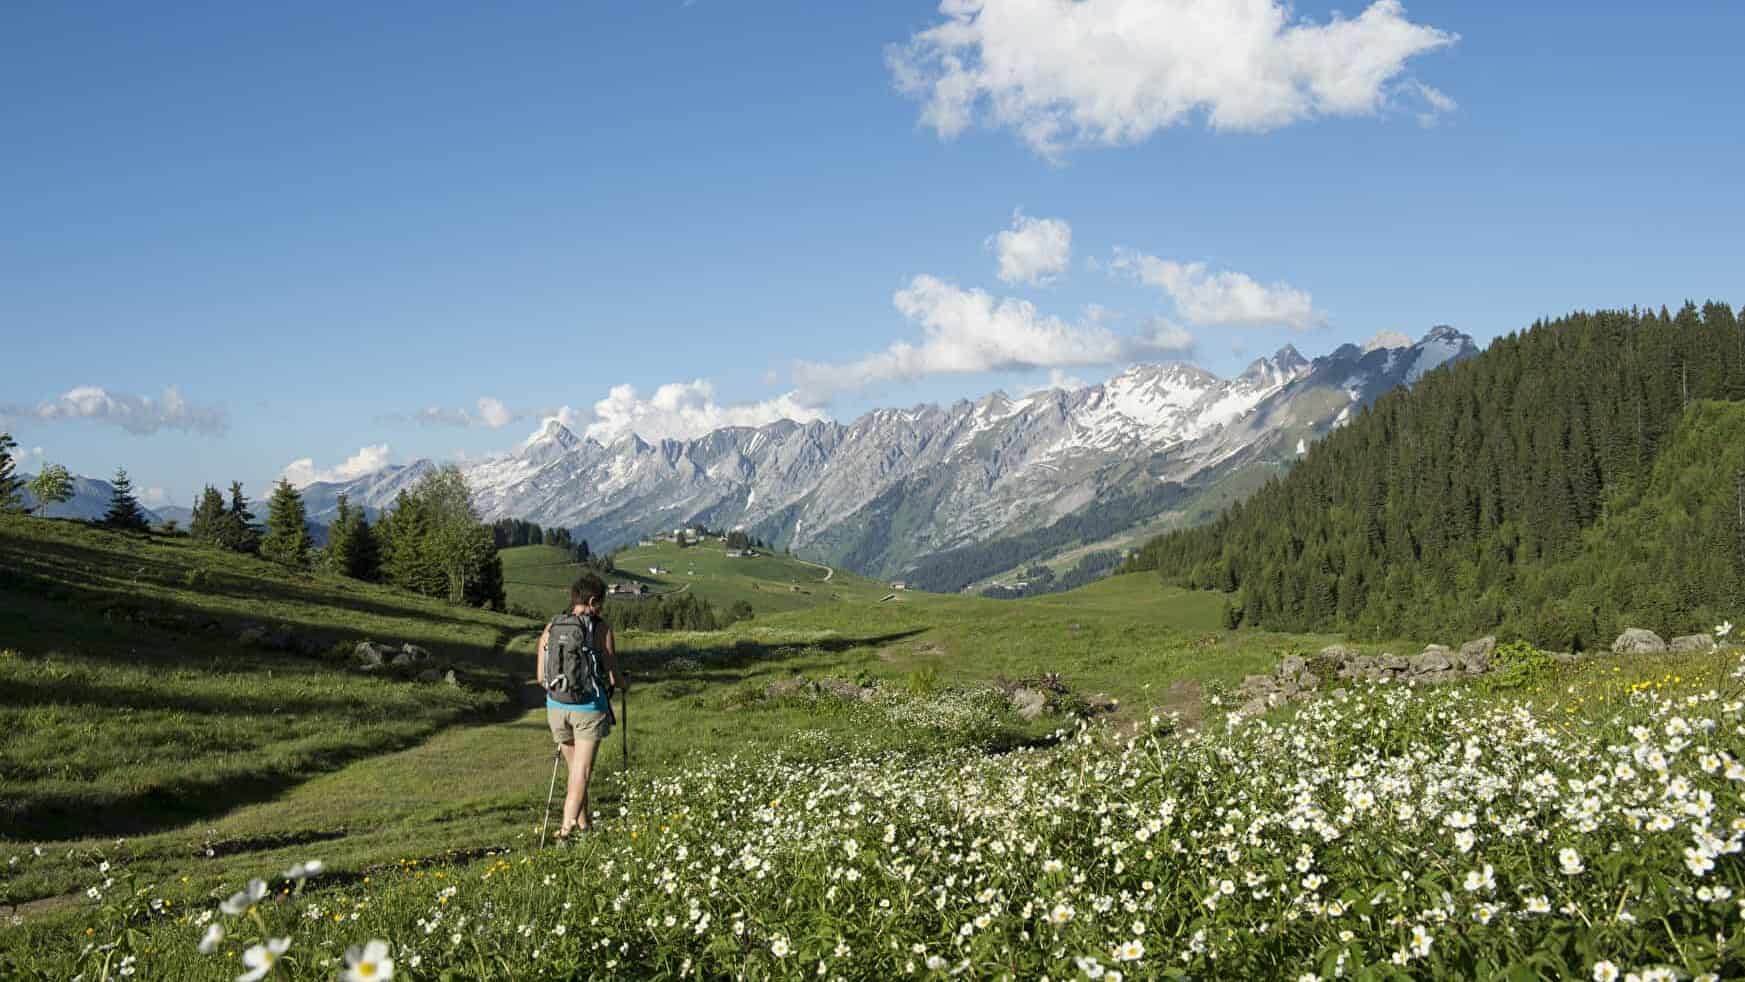 Woman walking in the mountains, in a field of flowers, with a blue sky and a view of the Aravis mountains.